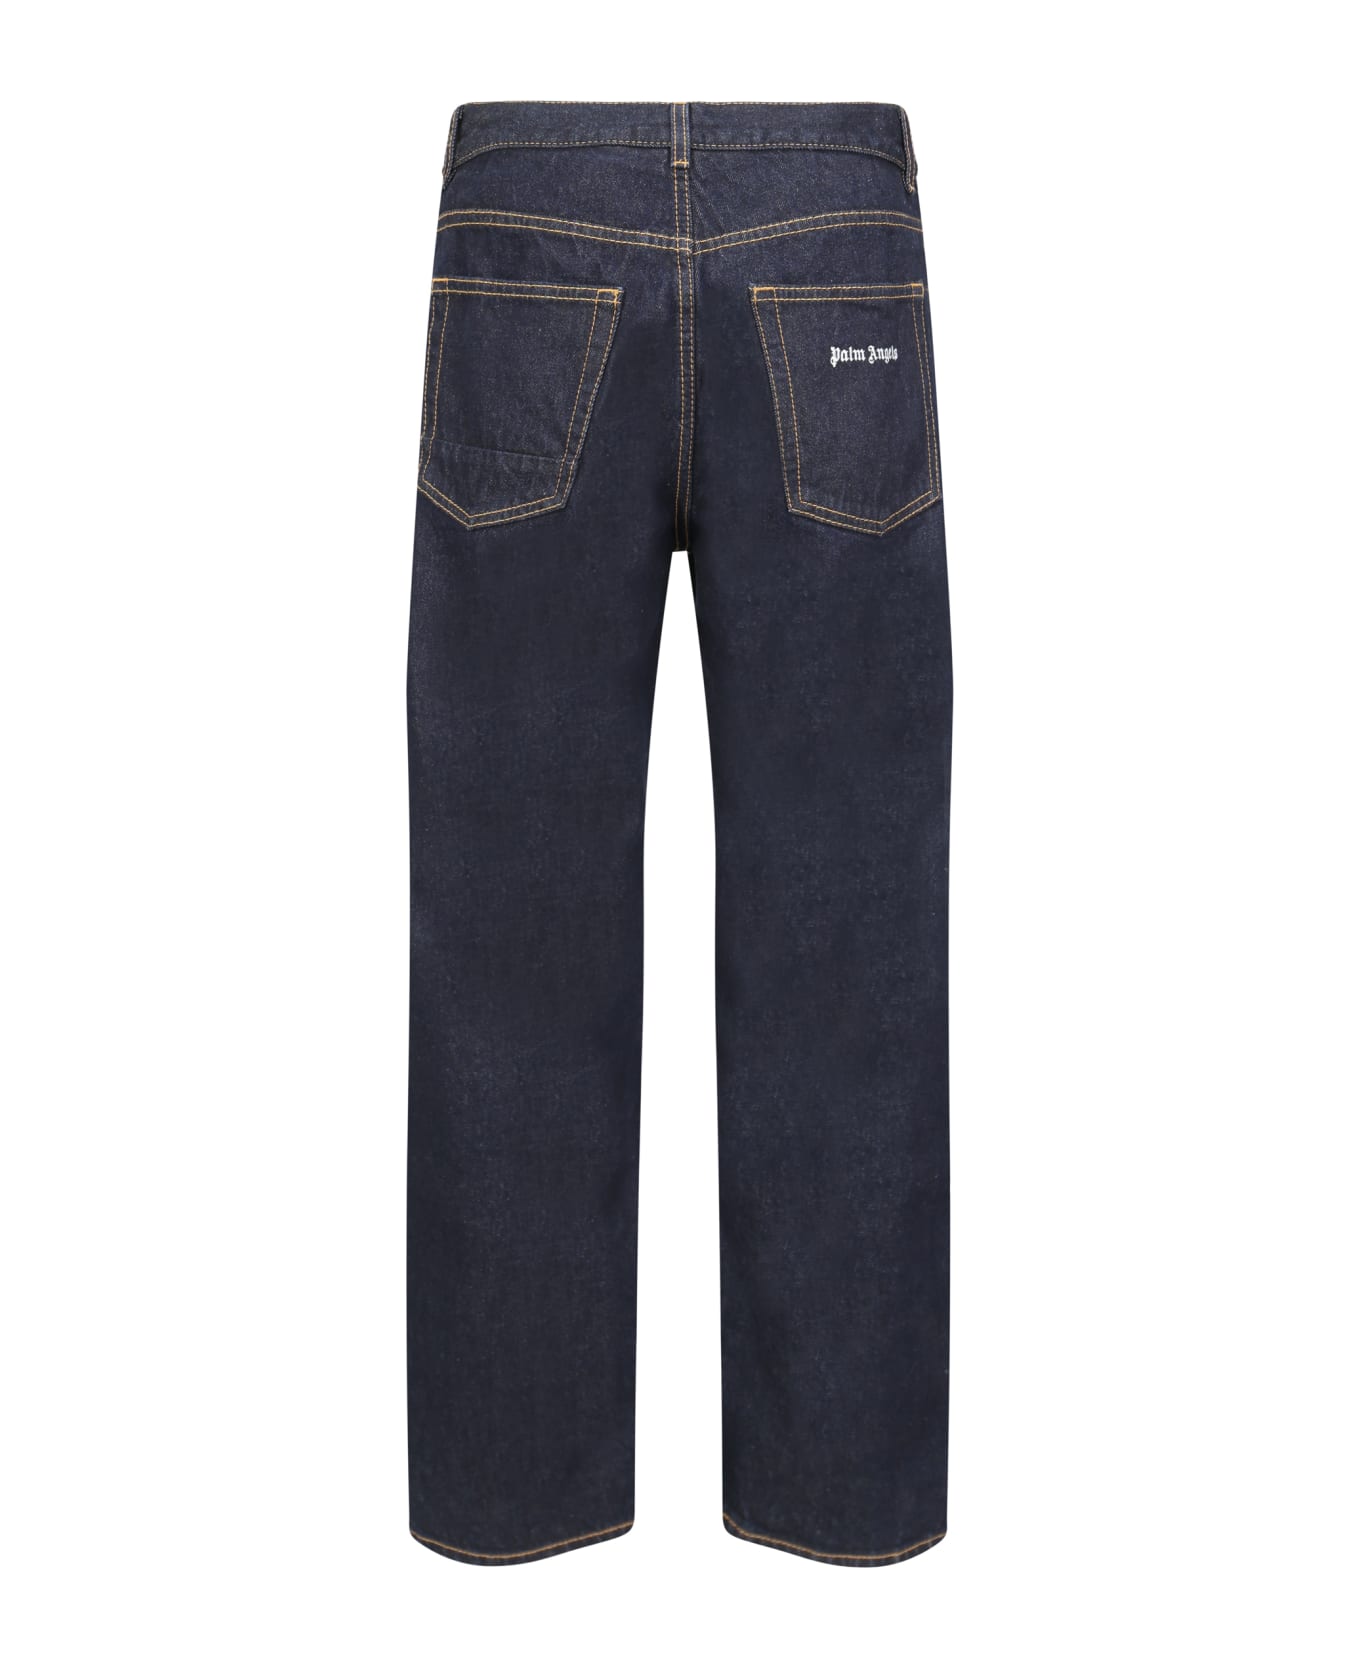 Palm Angels Loose Fit Jeans - Navy Blue